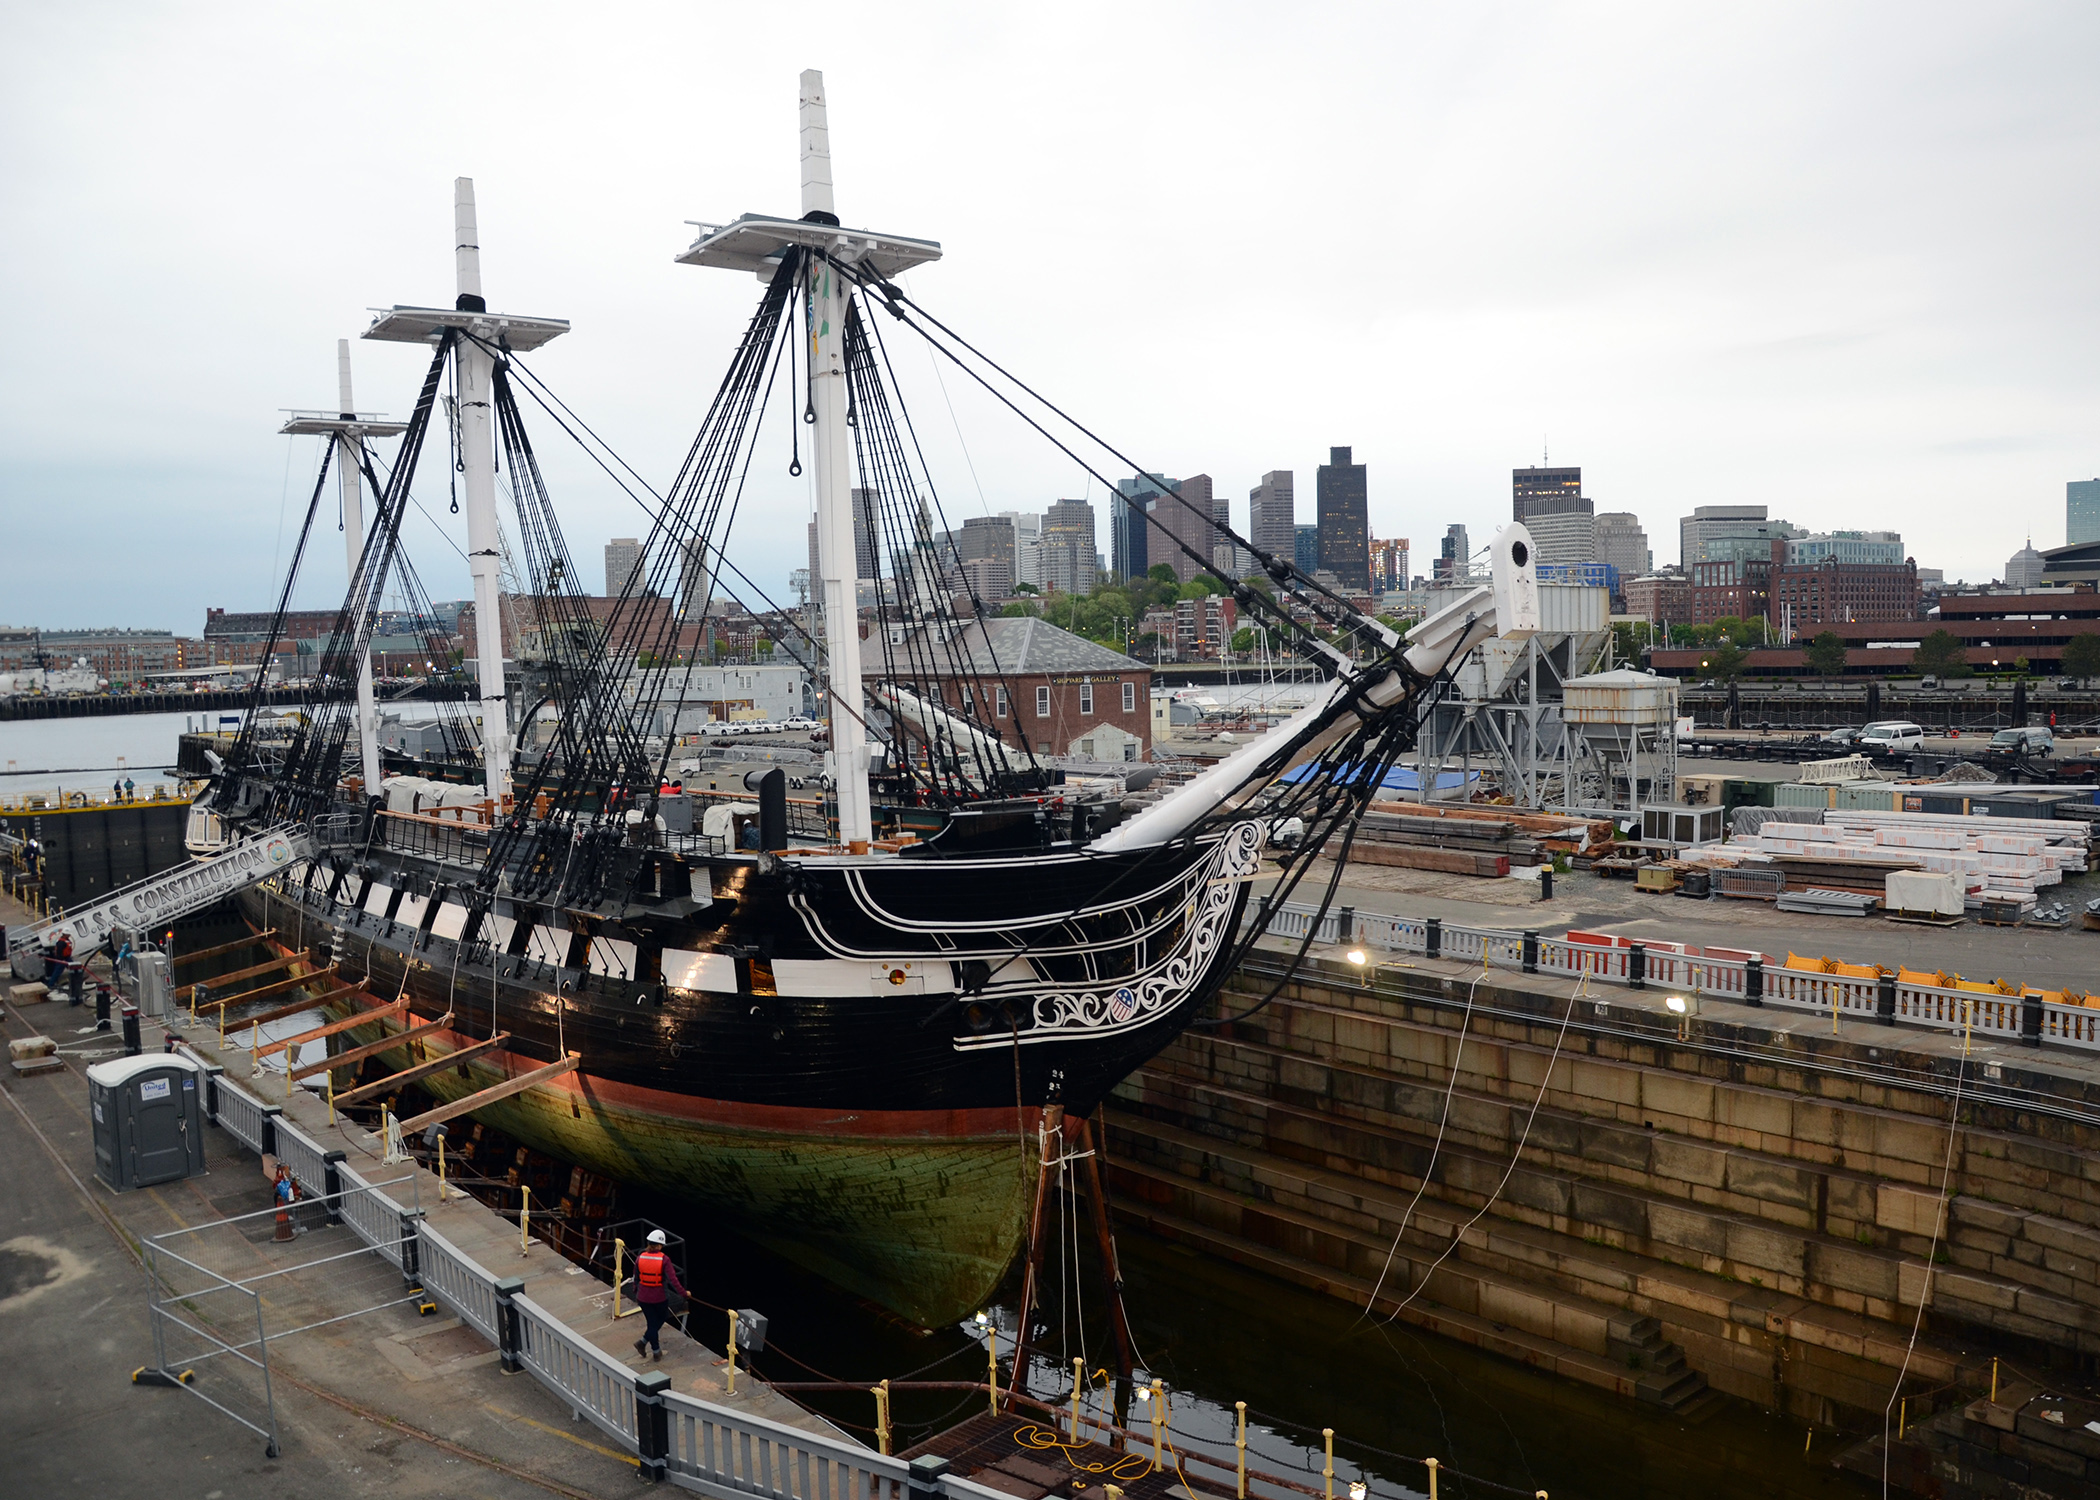 Constitution drydock for restoration with boston skyline in the background